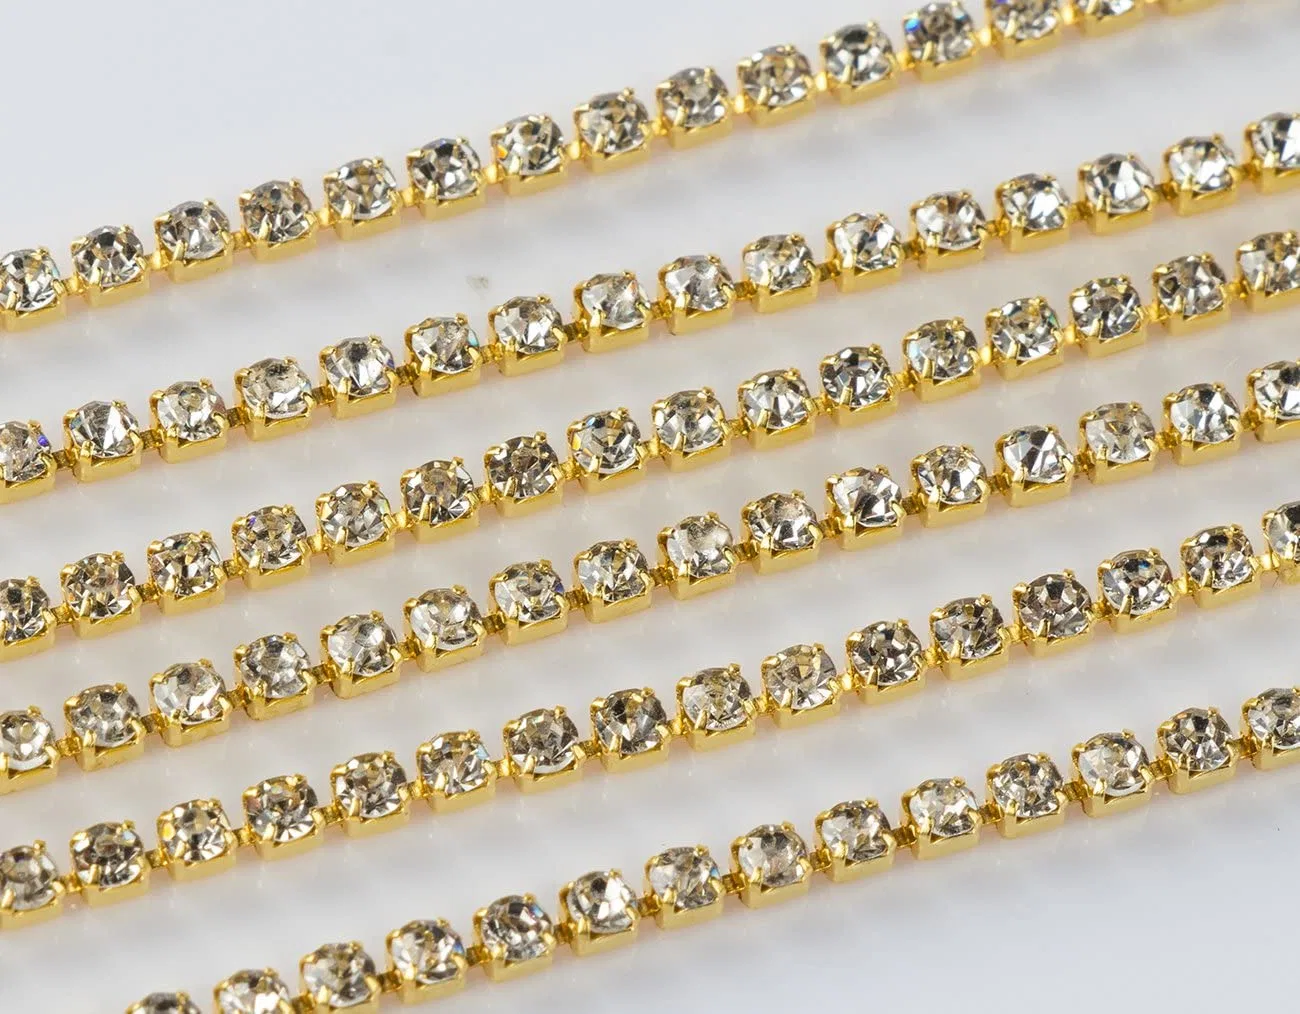 Wholesale Gold 2.0mm Width Rhinestone Dainty Body Chain Shining Necklace Non Allergic Stainless Steel Accessories for Ladies' Clothes Body Chain Jewelry Making